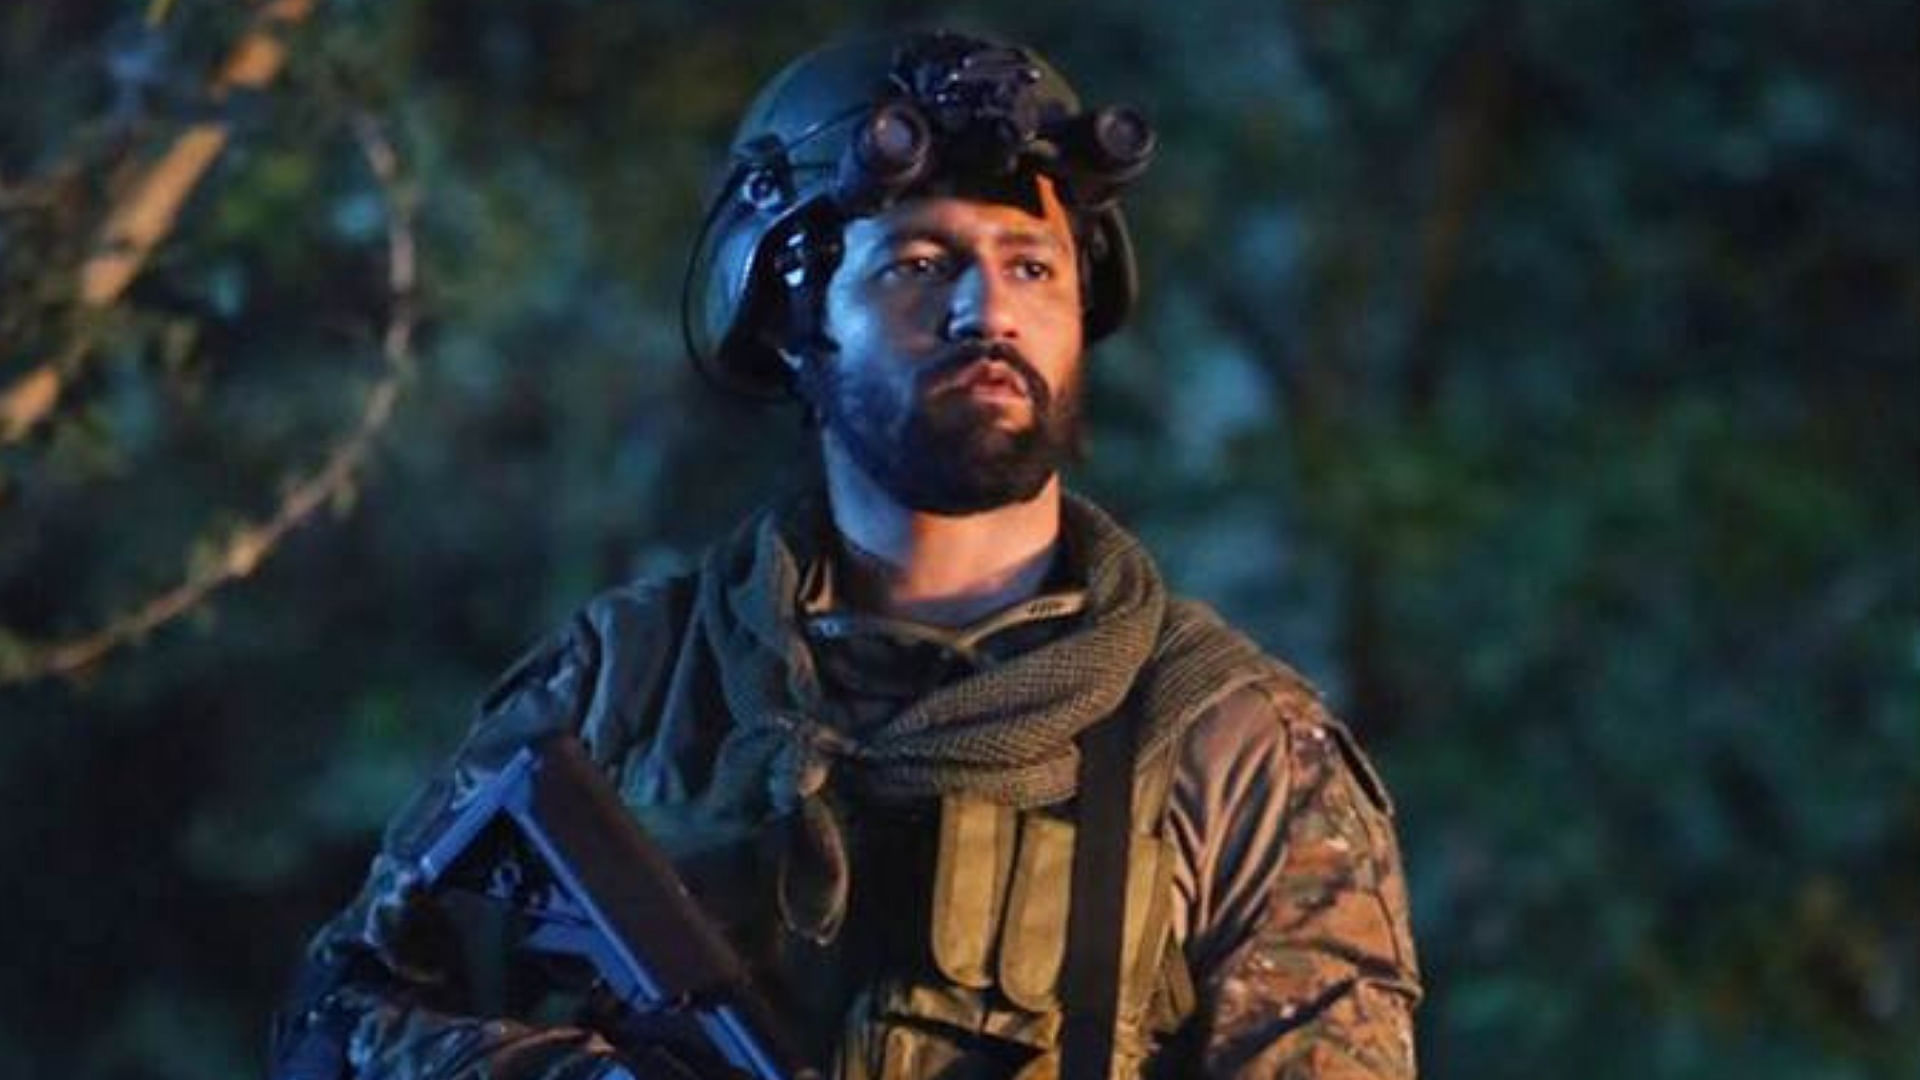 Vicky Kaushal in a still from <i>Uri: The Surgical Strike</i>.